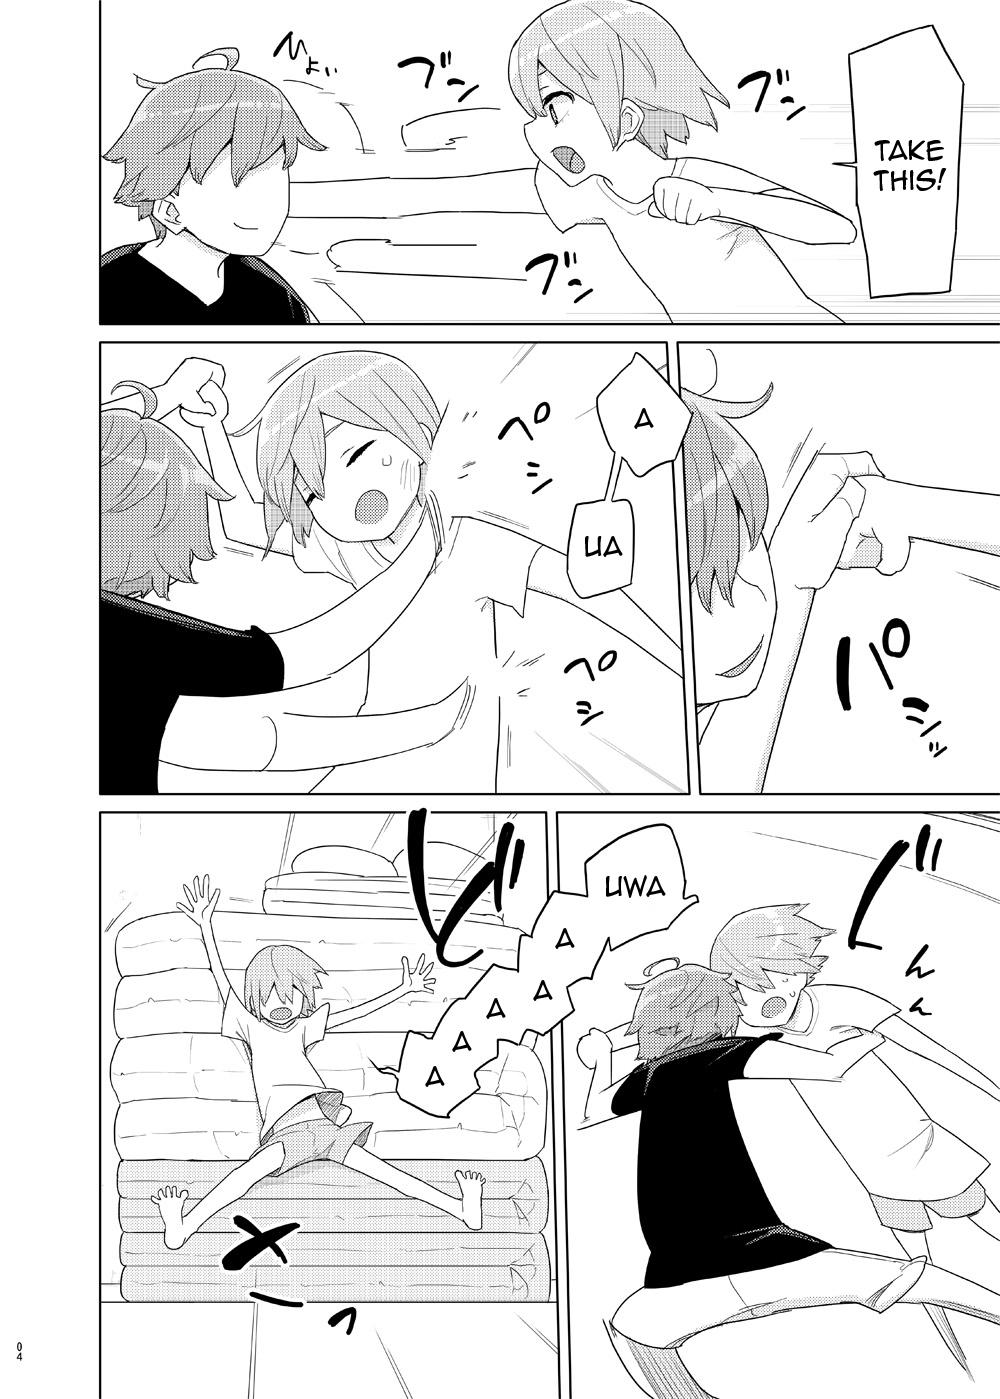 Phat Imouto to Kyuushuu Gokko | Little Sister and Absorption Play - Original Rough - Page 3